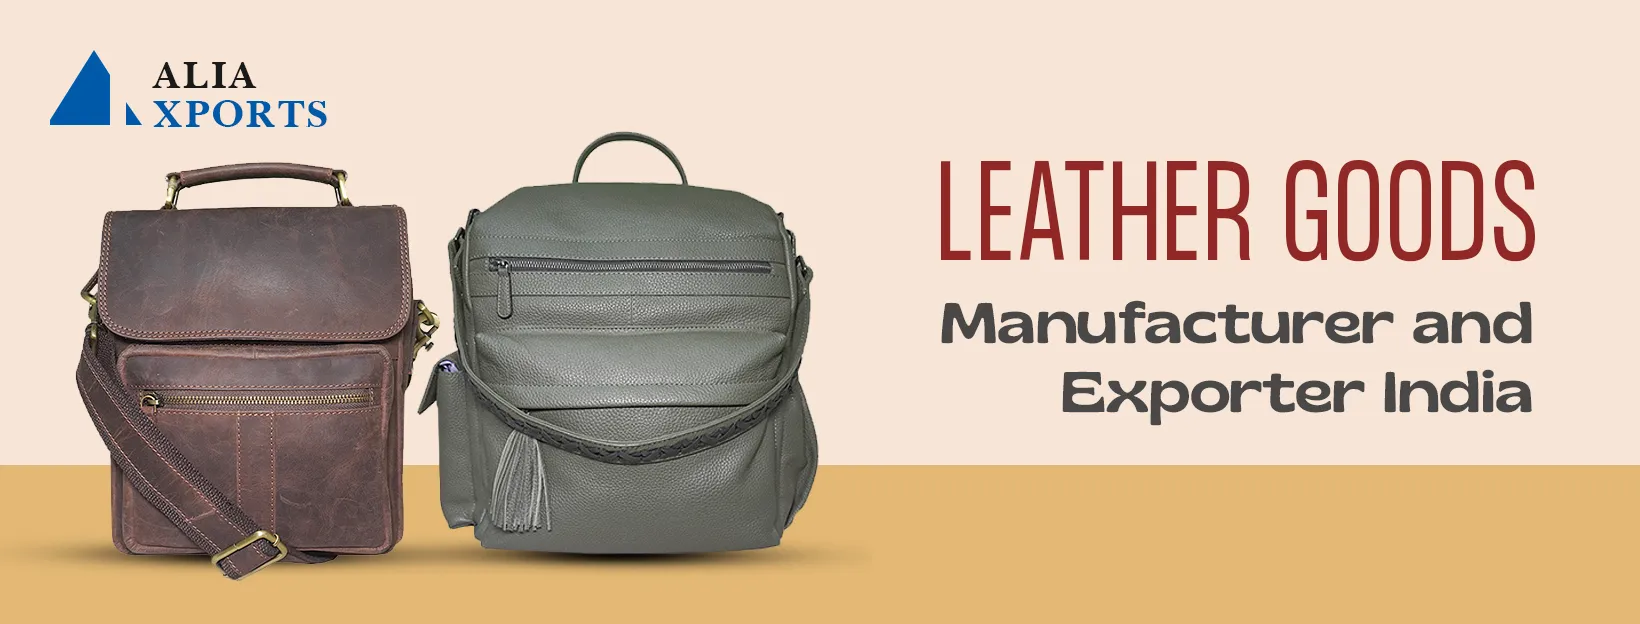 Banner of Alia Xports - Leather Goods Manufacturer in India